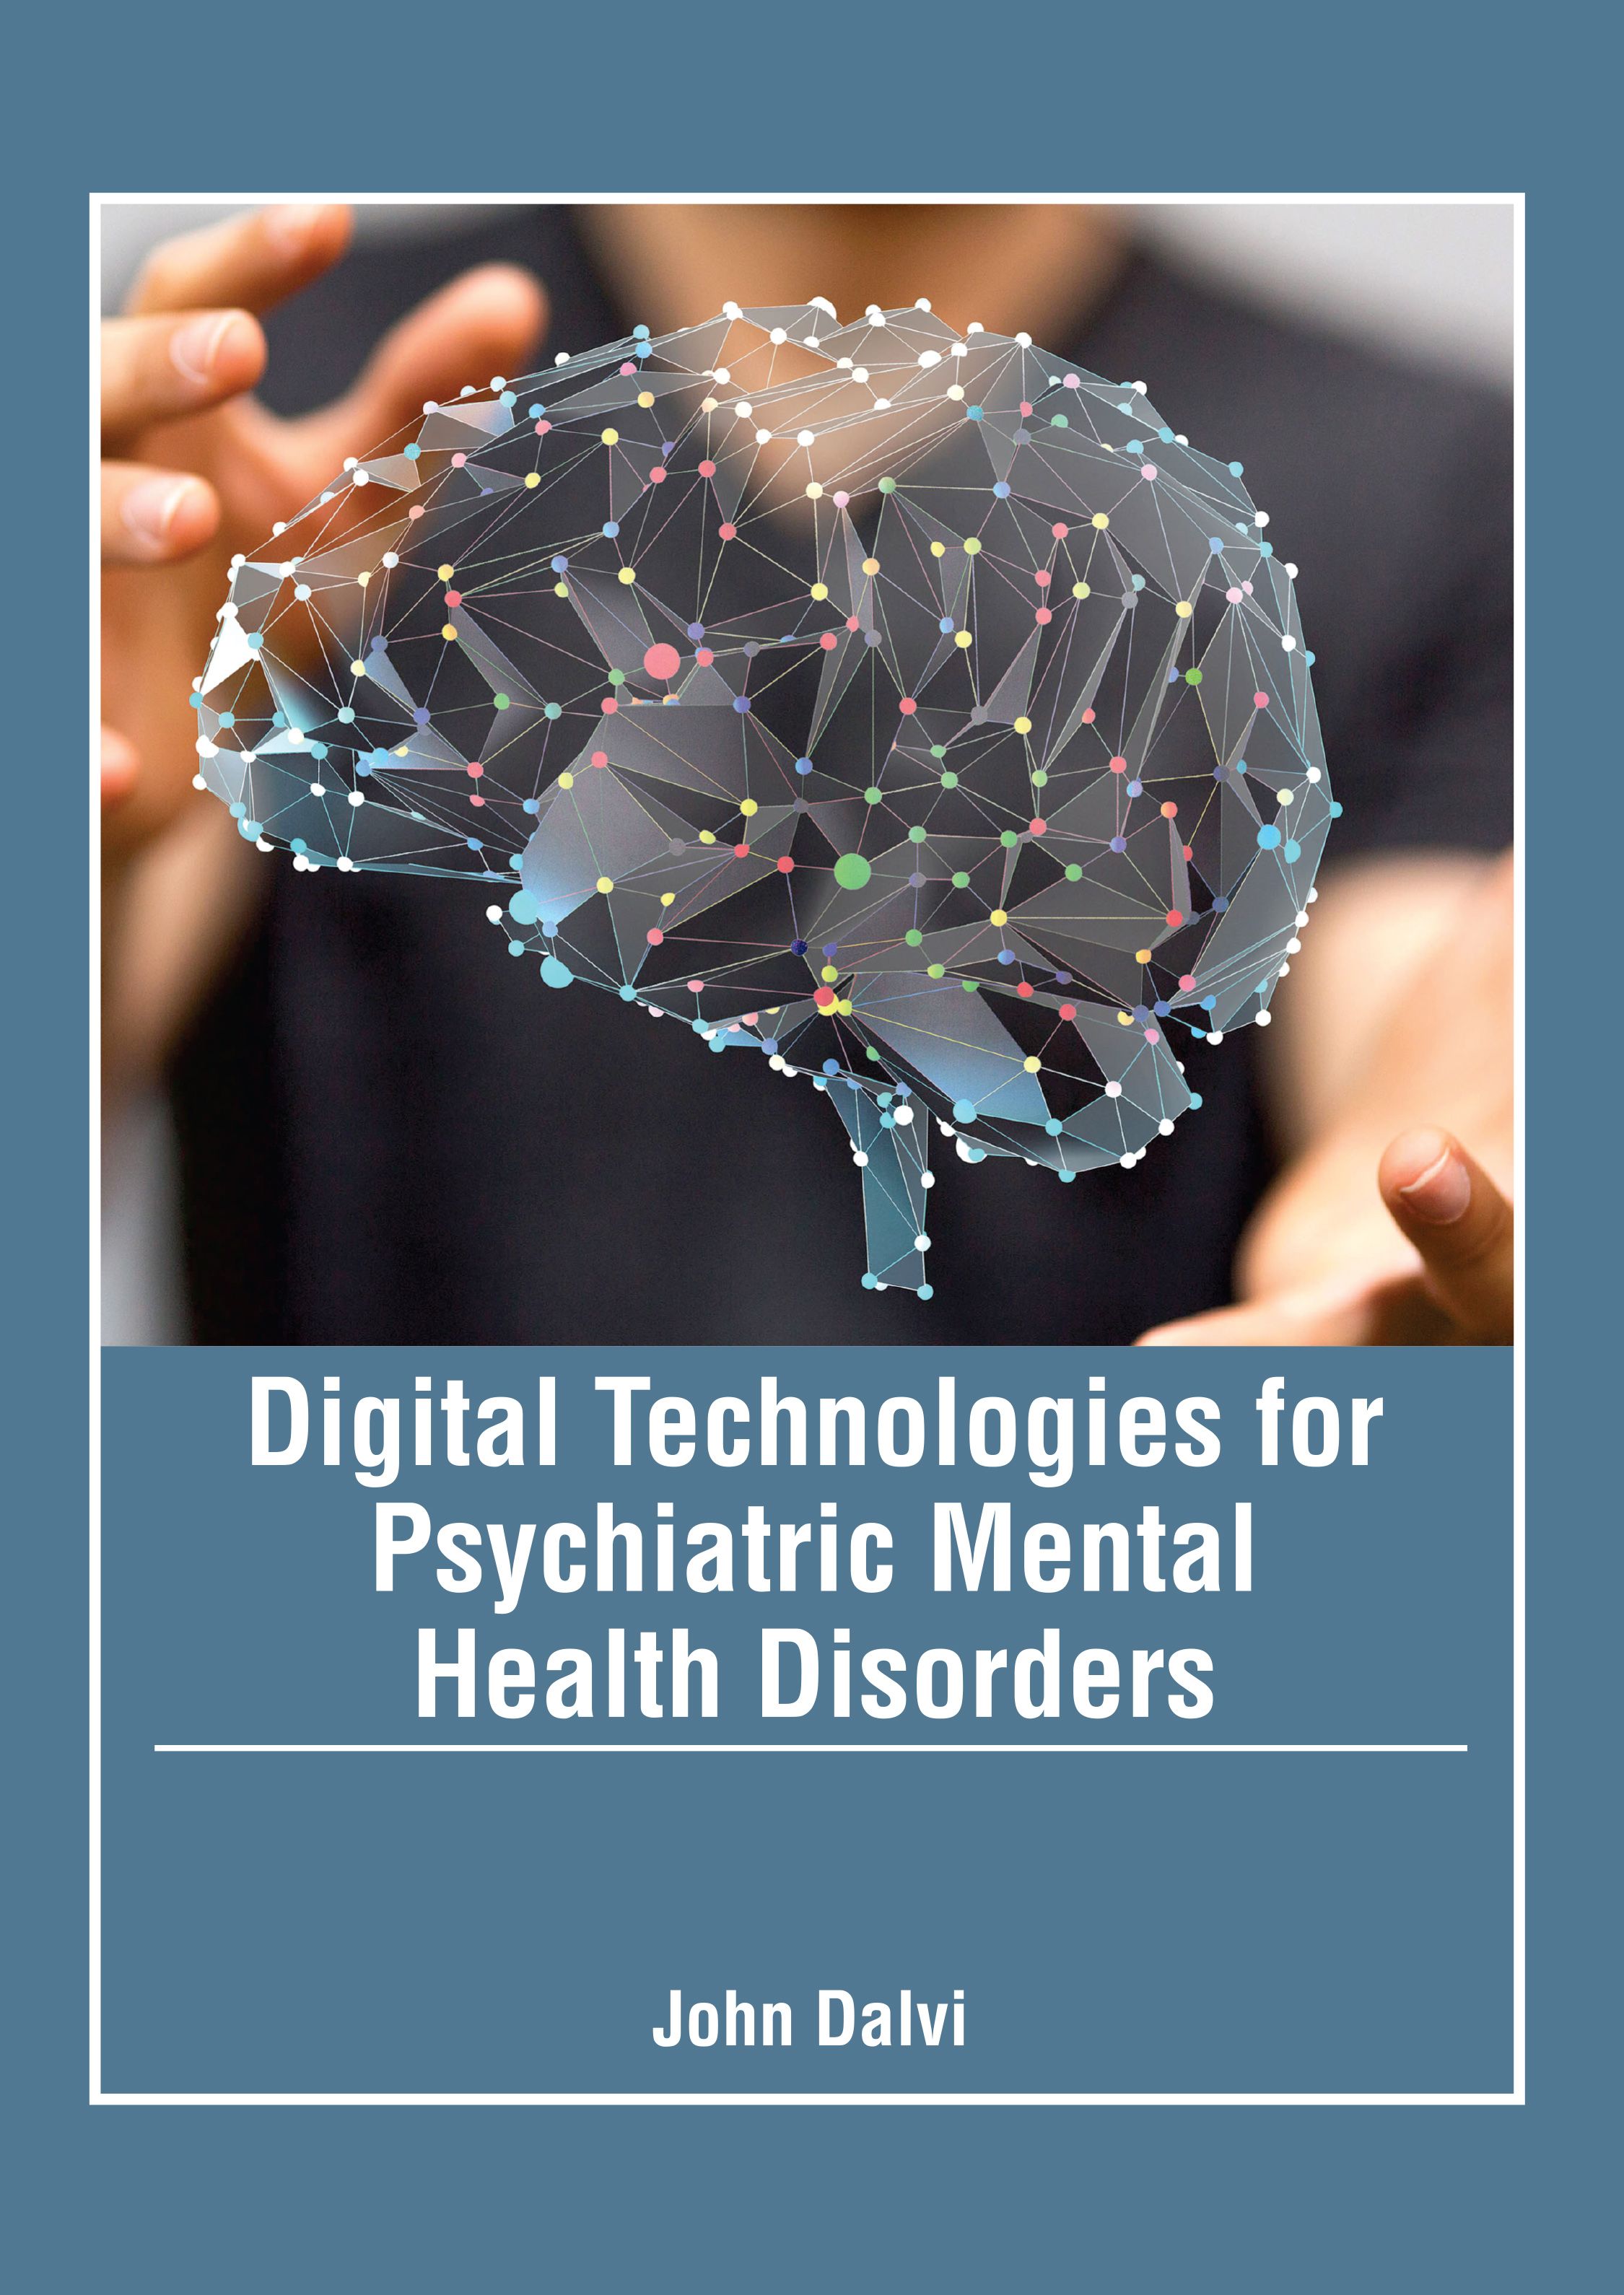 medical-reference-books/psychiatry/digital-technologies-for-psychiatric-mental-health-disorders-9798887400624